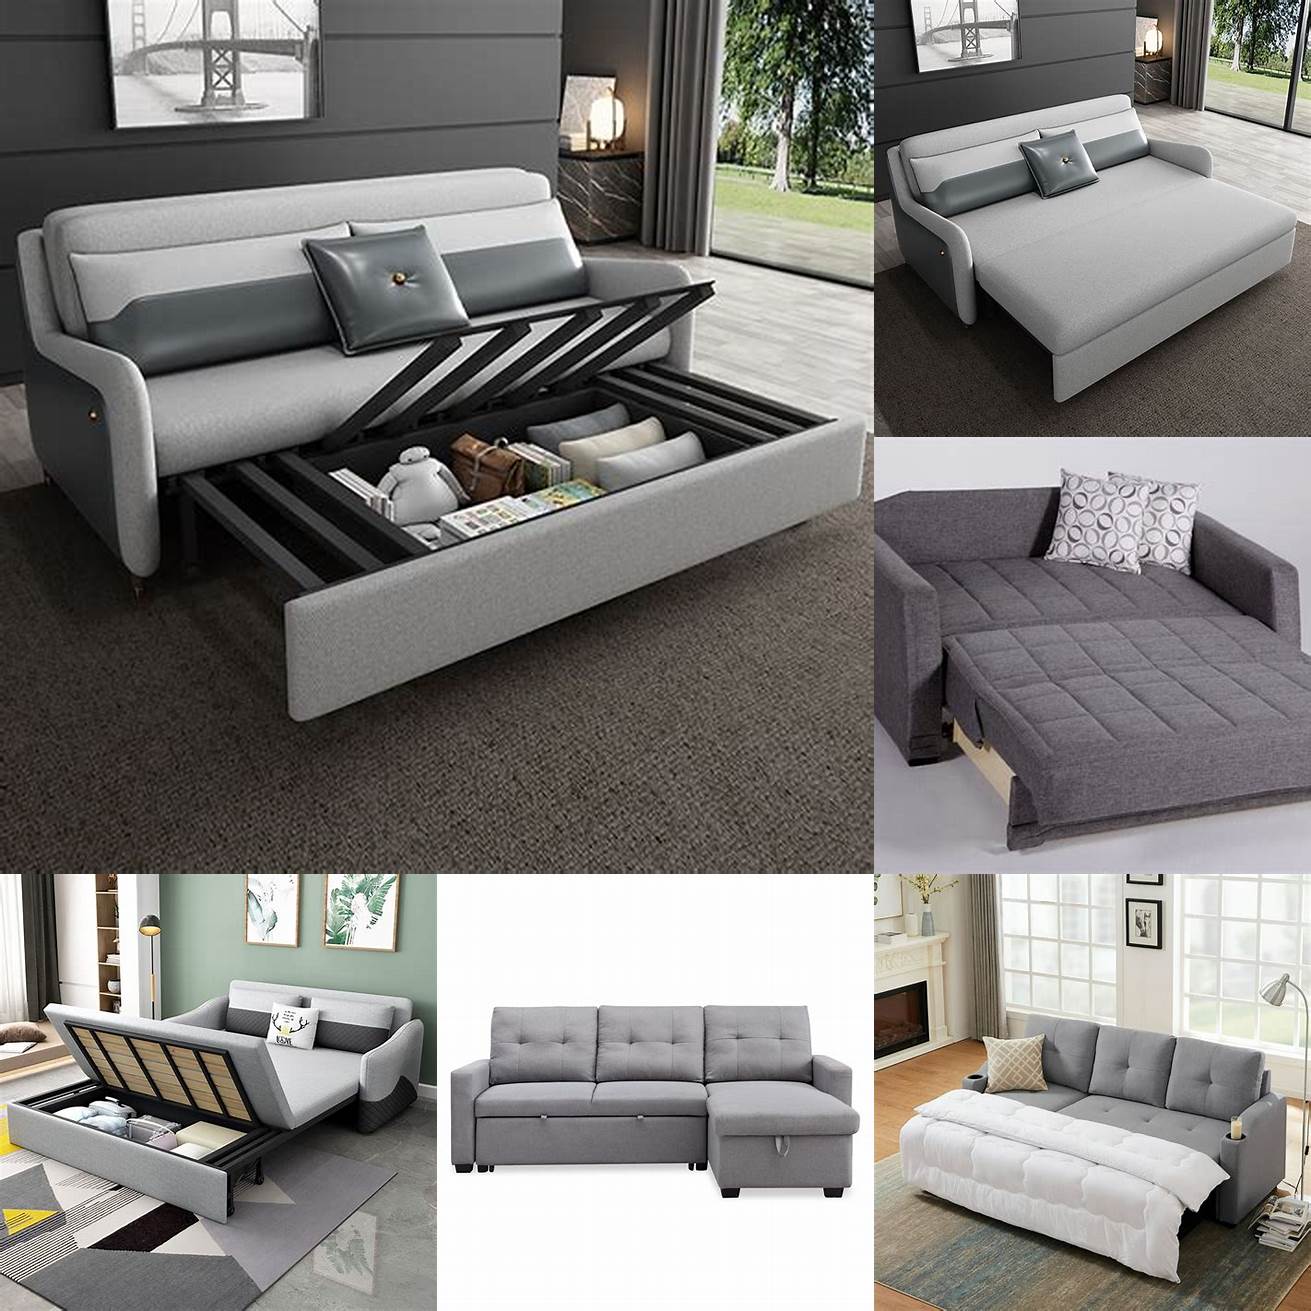 A grey Full Sleeper Sofa with storage is a great option for a small space